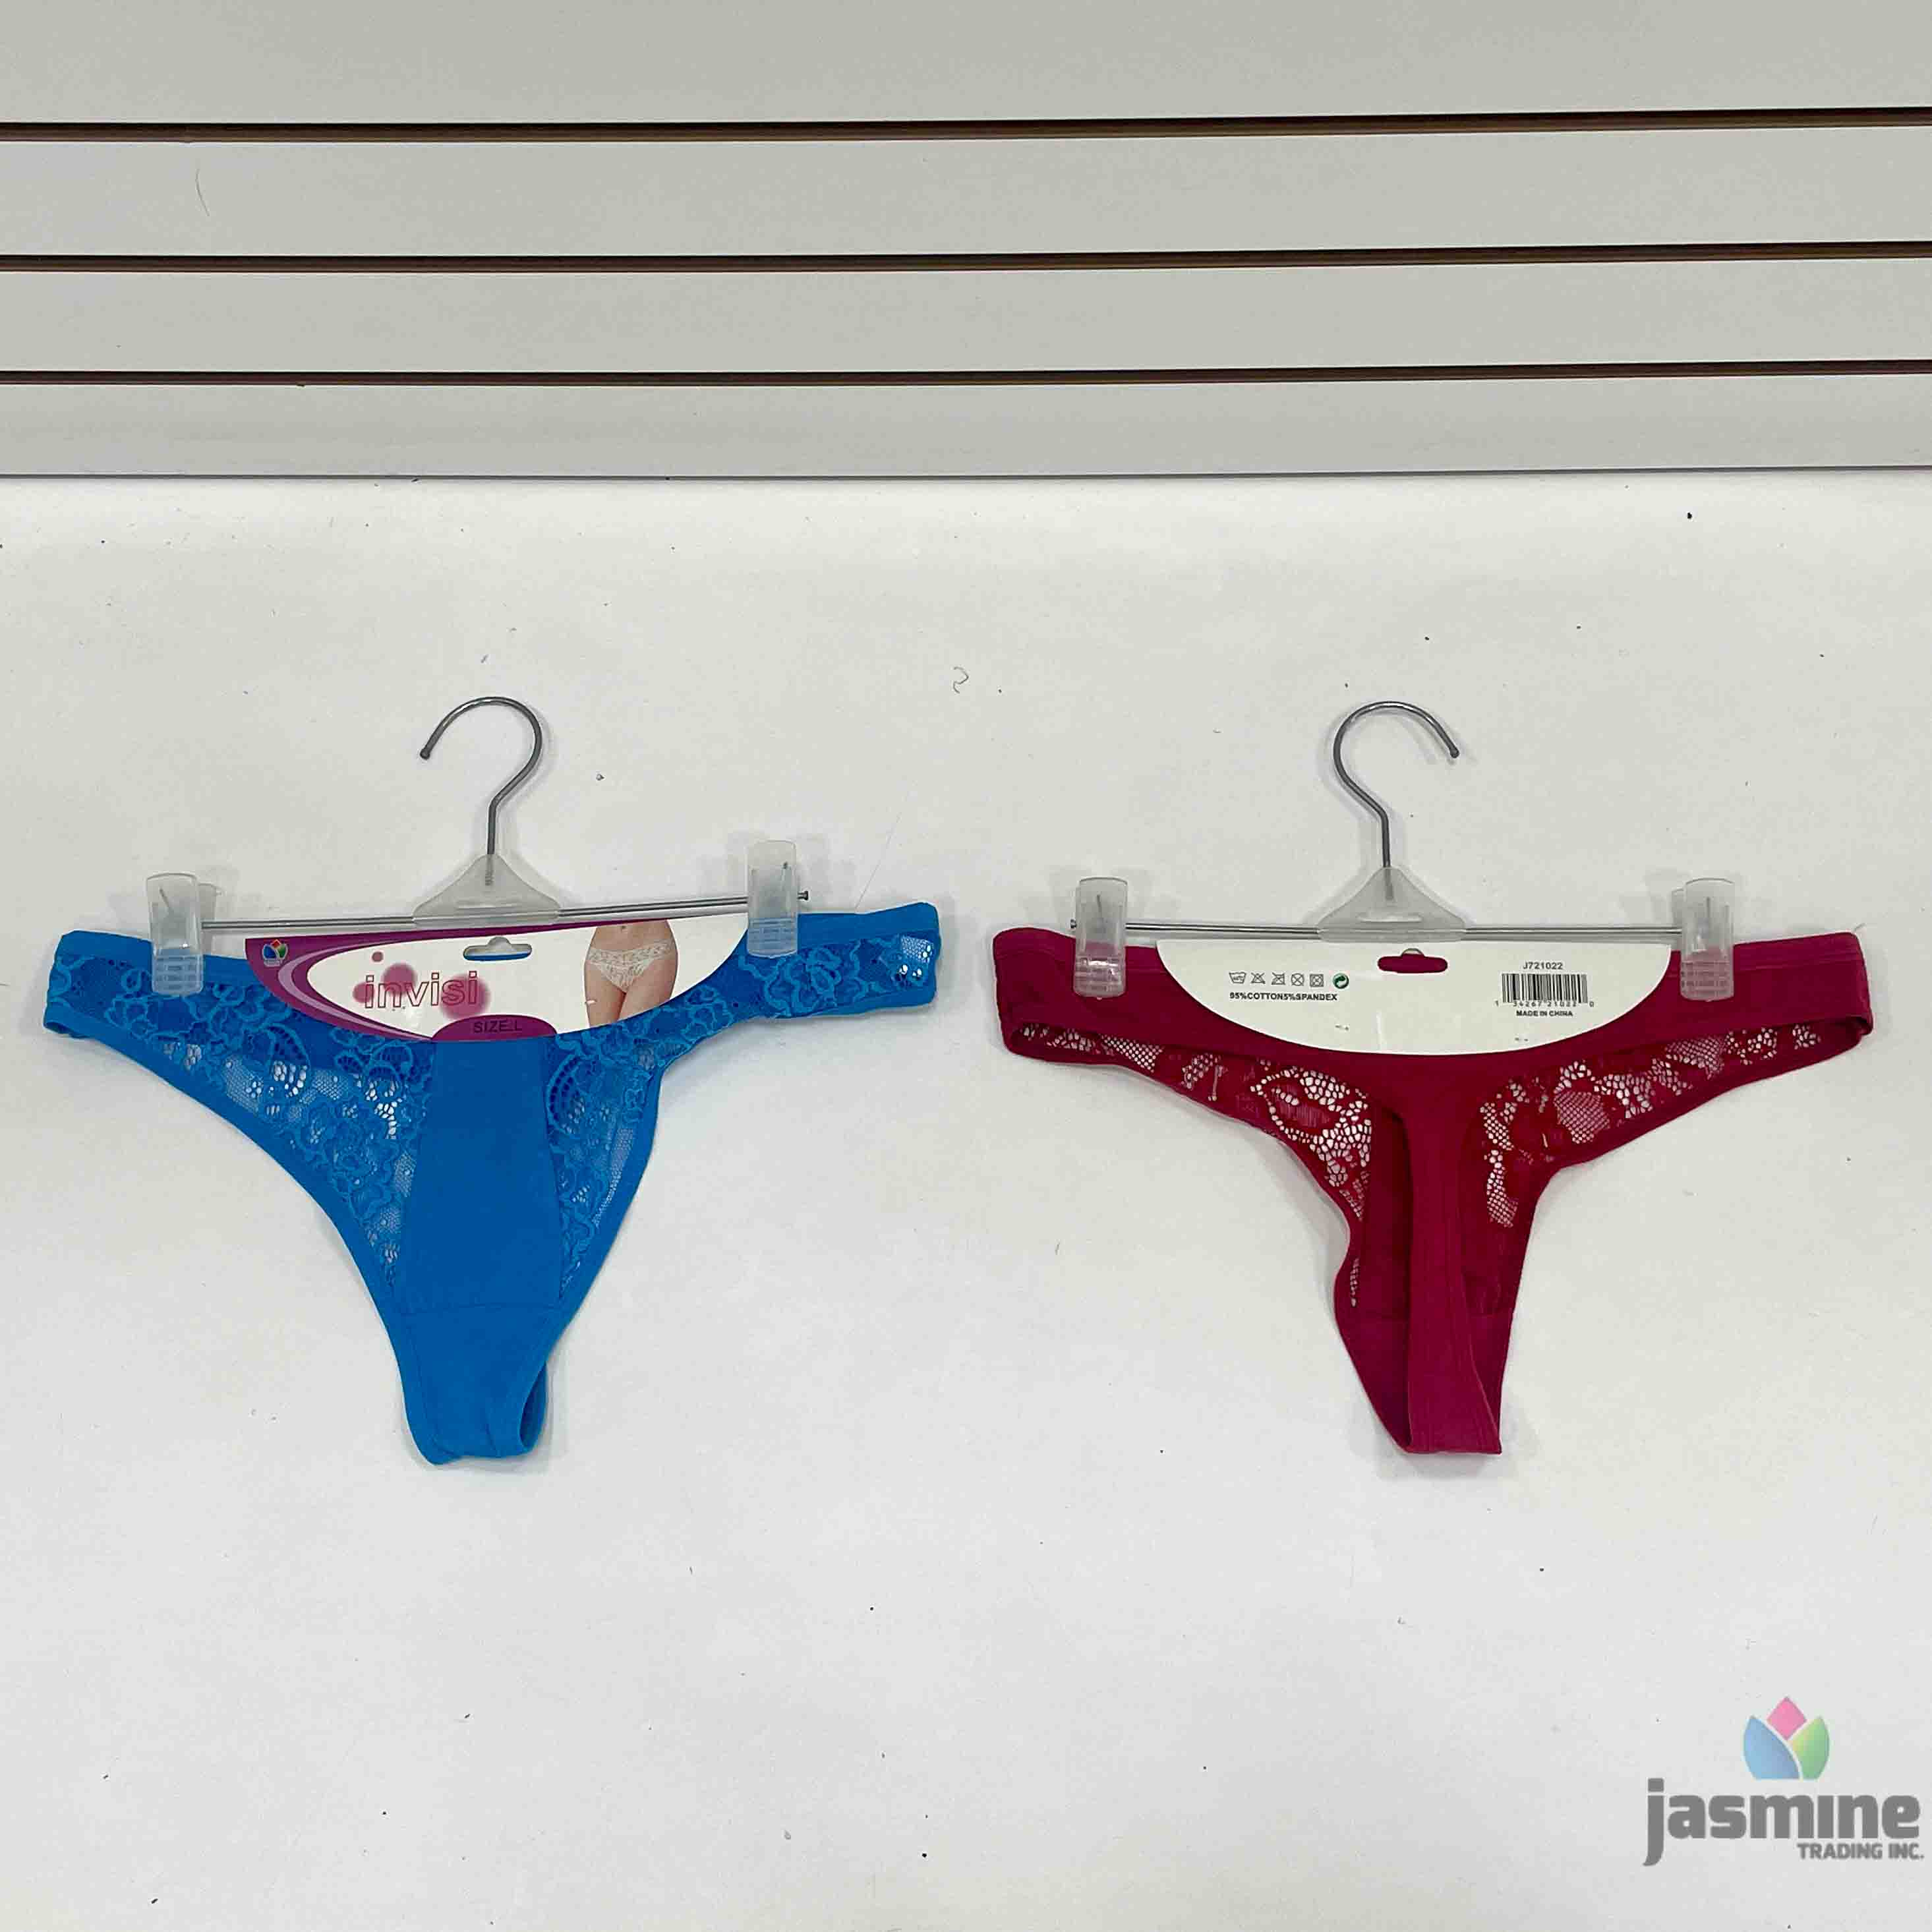 Jasmine Trading, Inc. » QUALITY PRODUCTS INVISI WOMEN'S UNDERWEAR